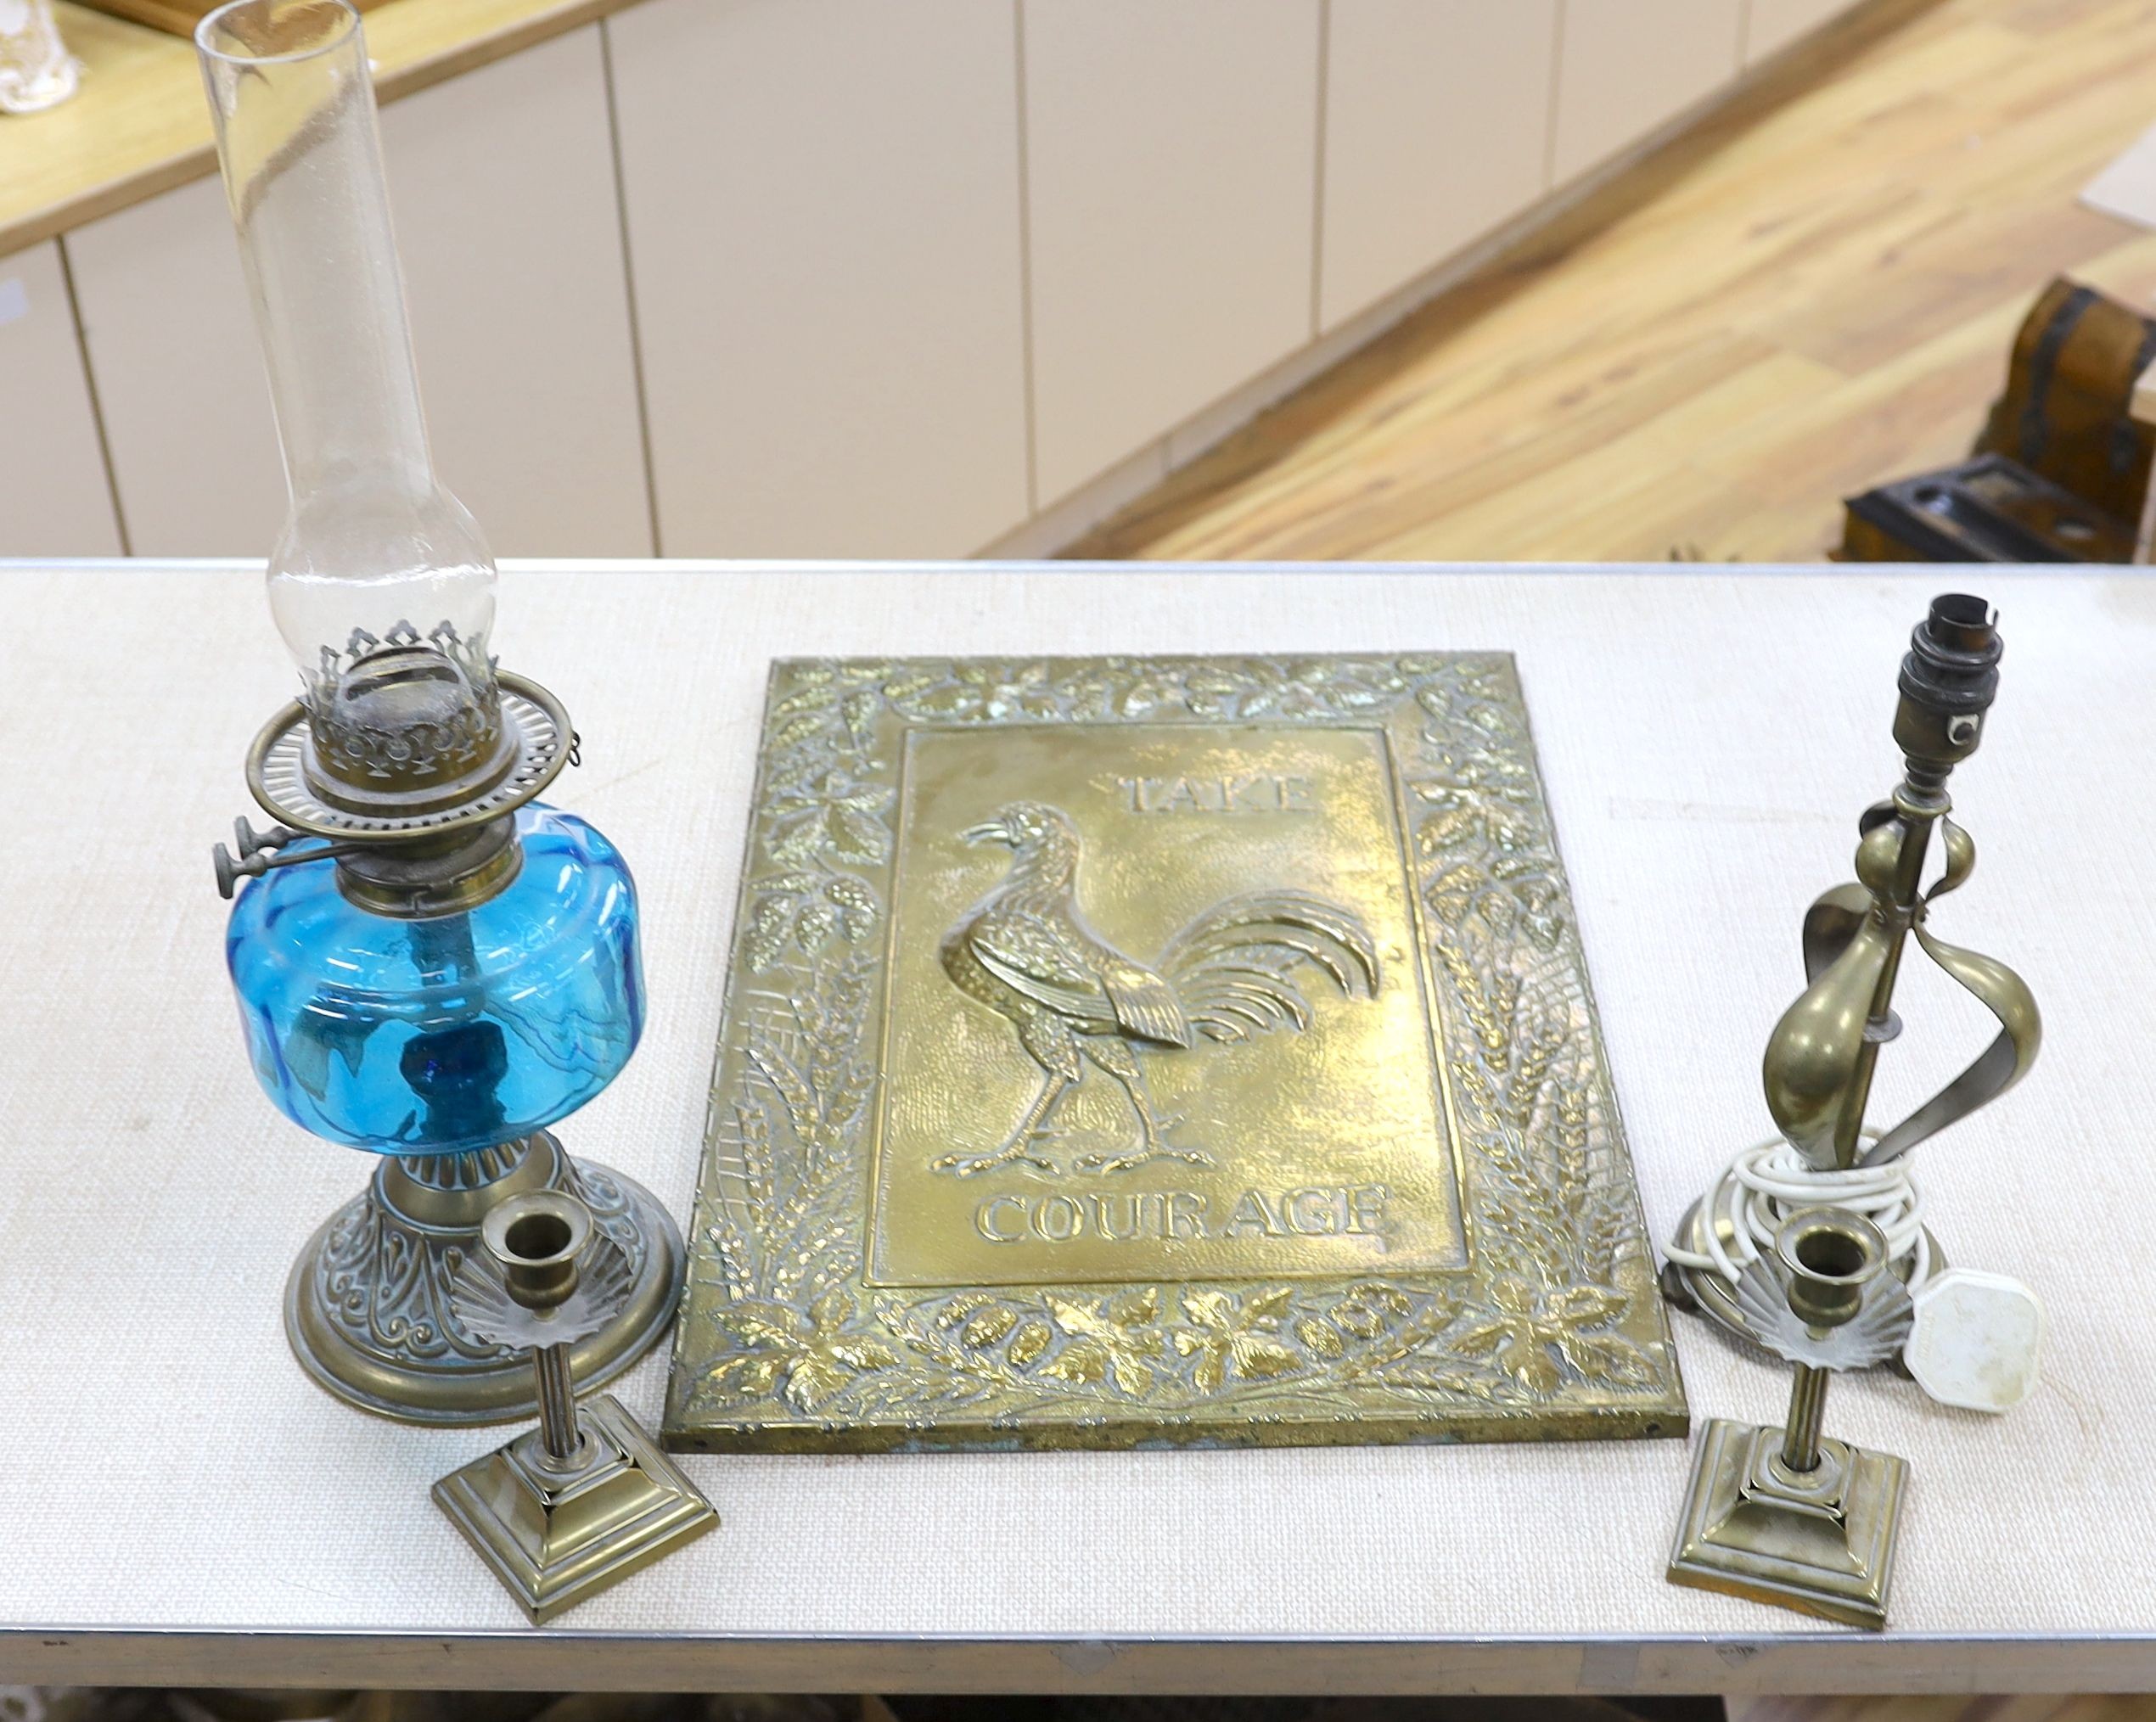 A brass Art Nouveau lamp, a pair of candlesticks, oil lamp and brass Courage advertising sign